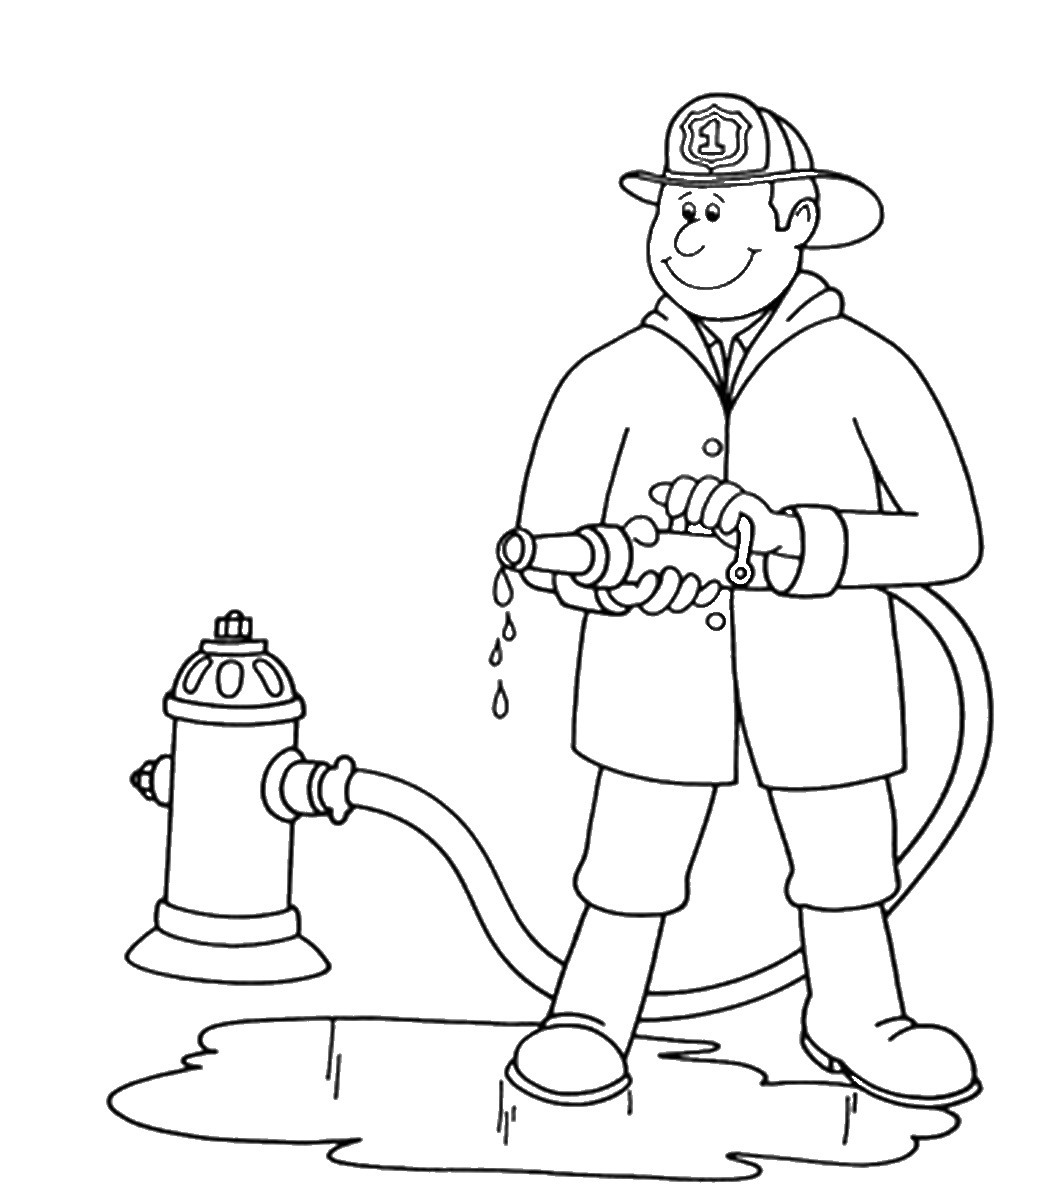 Free Firefighter Cliparts Black Download Free Clip Art Free Clip Art On Clipart Library We offer you for free download top of black and white fireman clipart pictures. clipart library